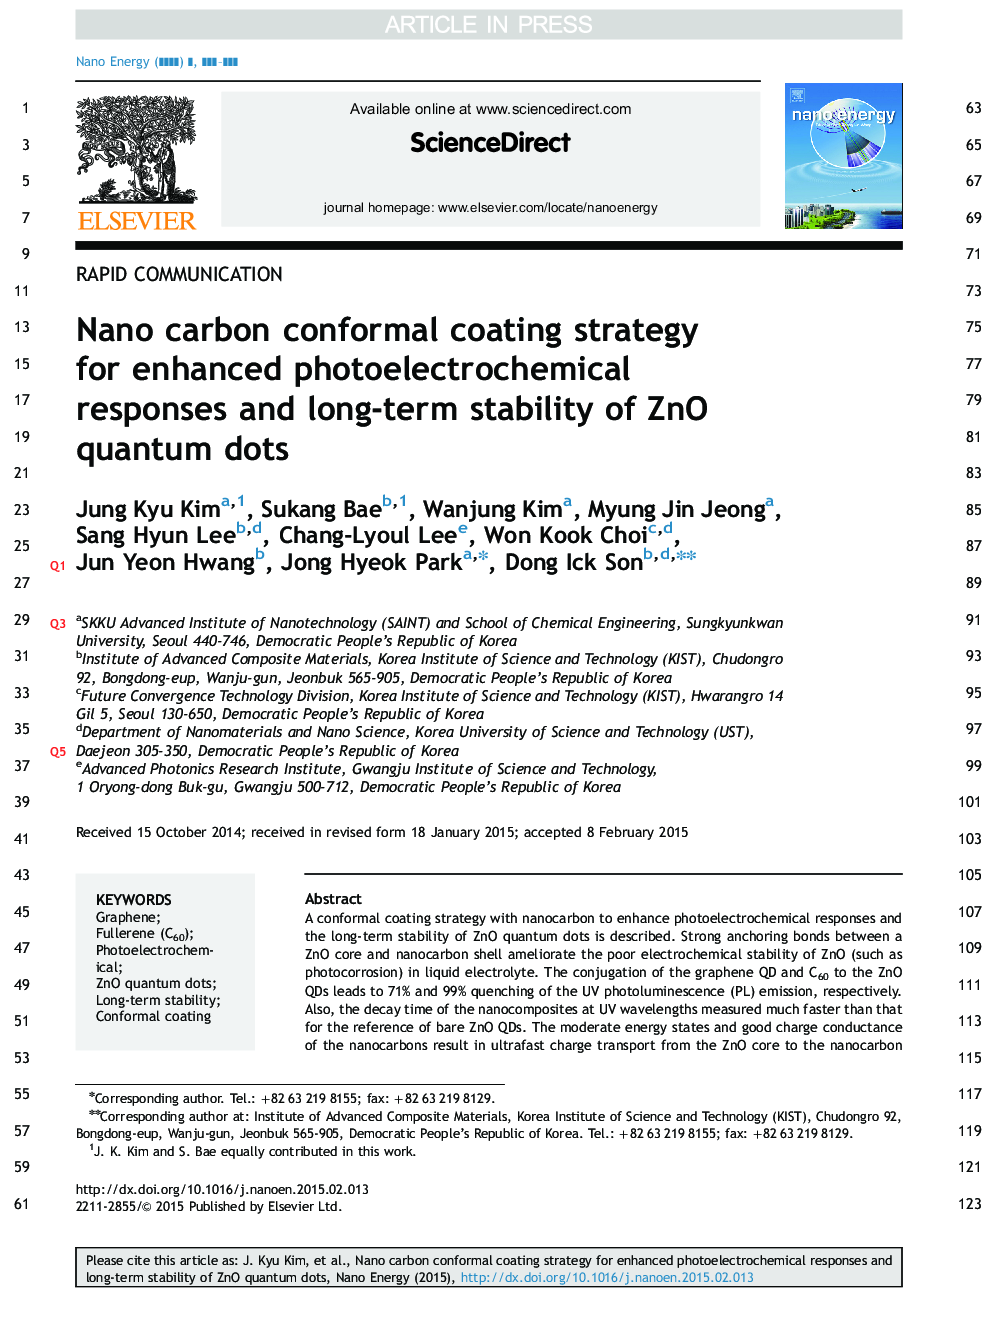 Nano carbon conformal coating strategy for enhanced photoelectrochemical responses and long-term stability of ZnO quantum dots